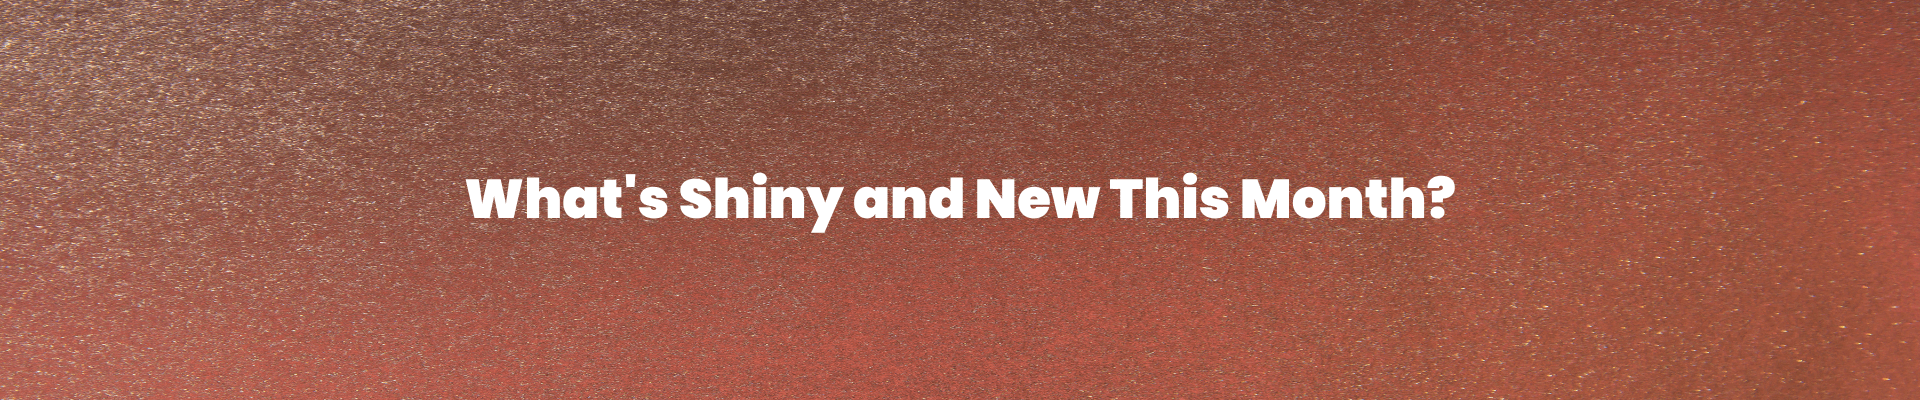 What's Shiny and New this Month